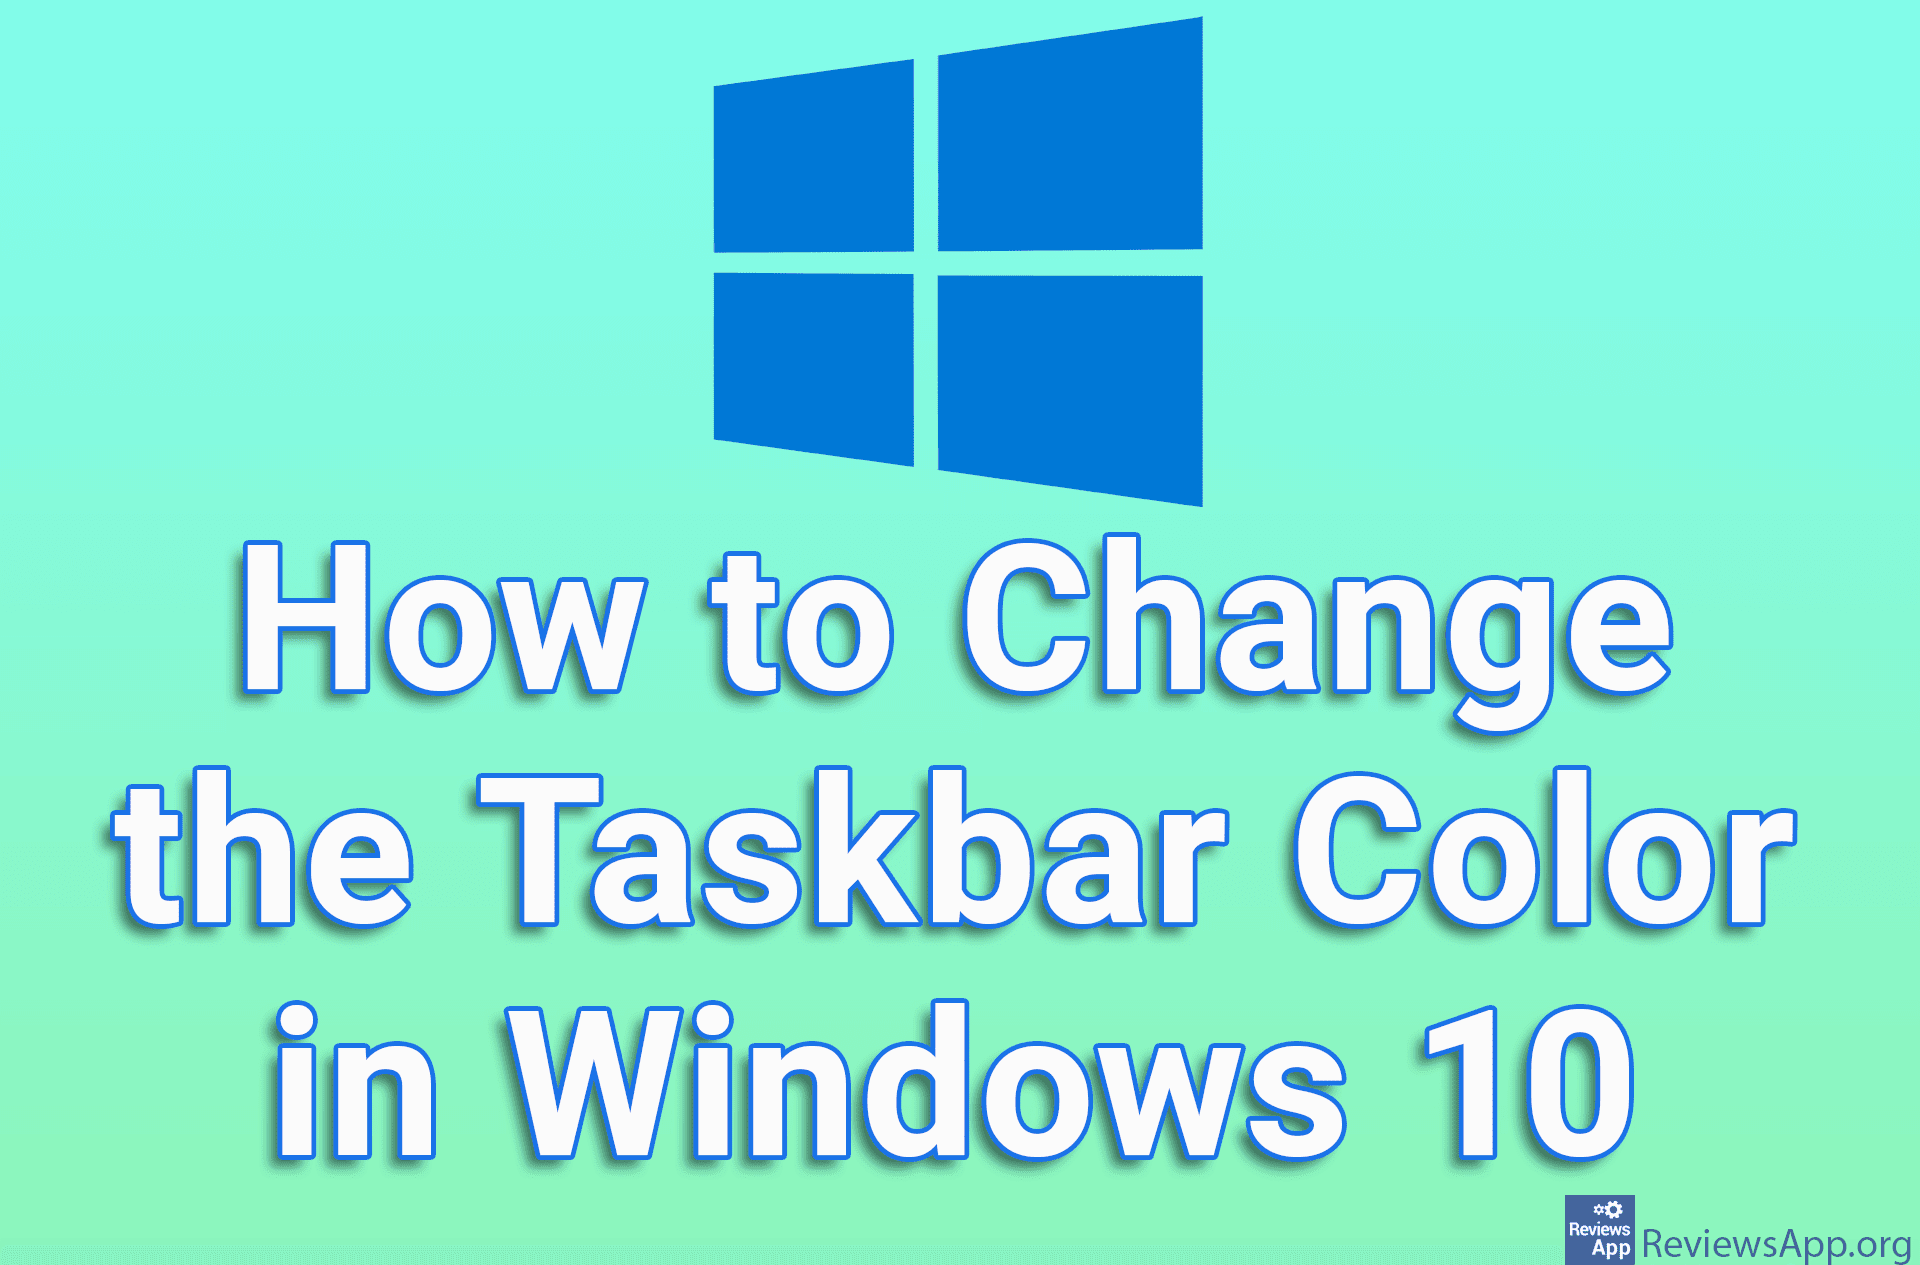 How to Change the Taskbar Color in Windows 10